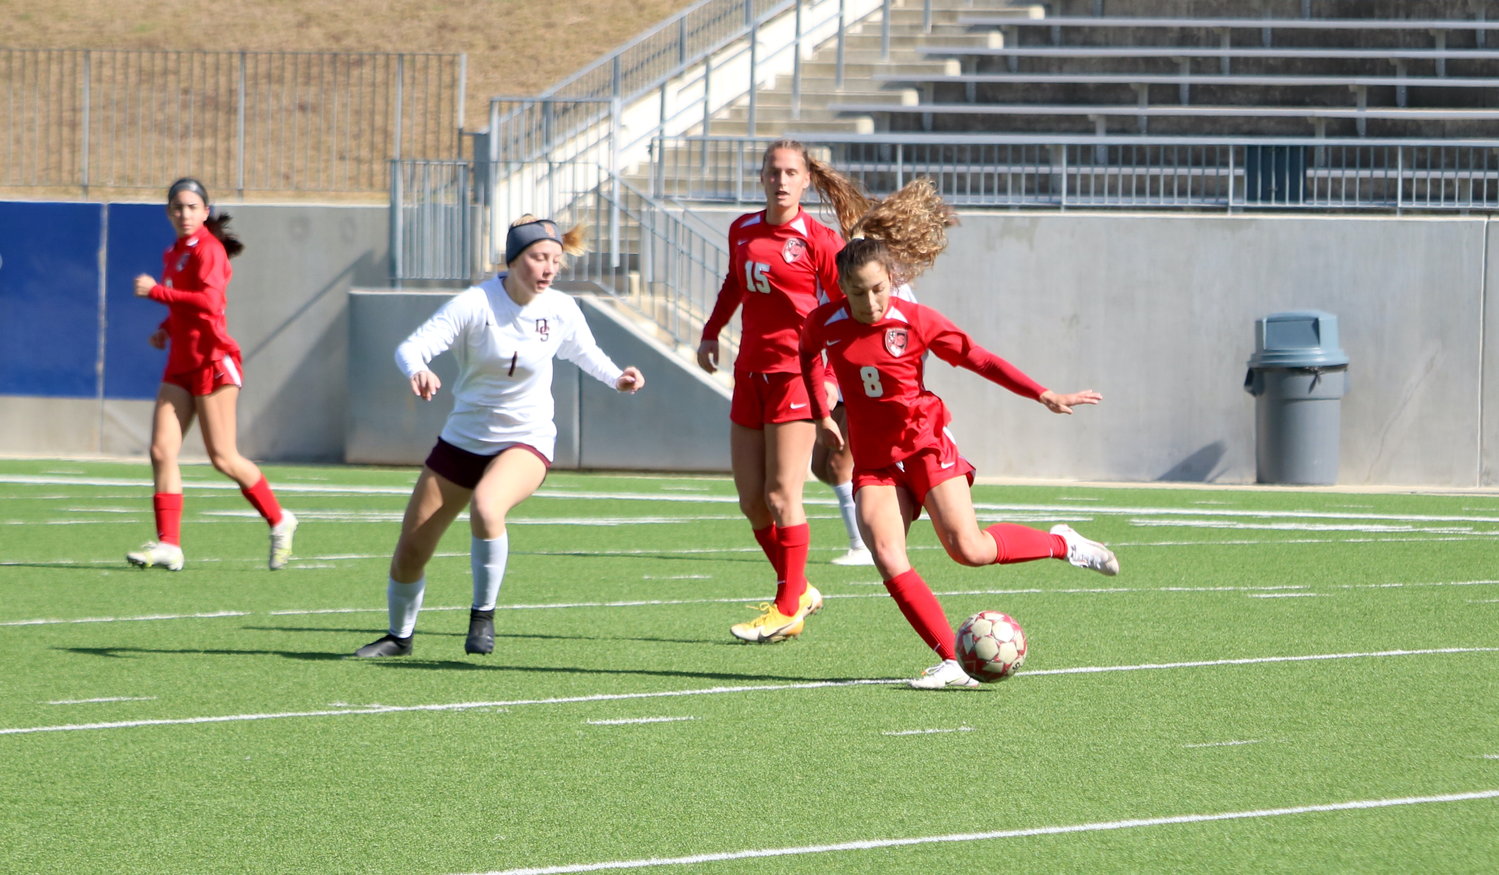 Emma Fitzgerald passes the ball during a game between Katy and Dripping Springs at Legacy on Saturday.